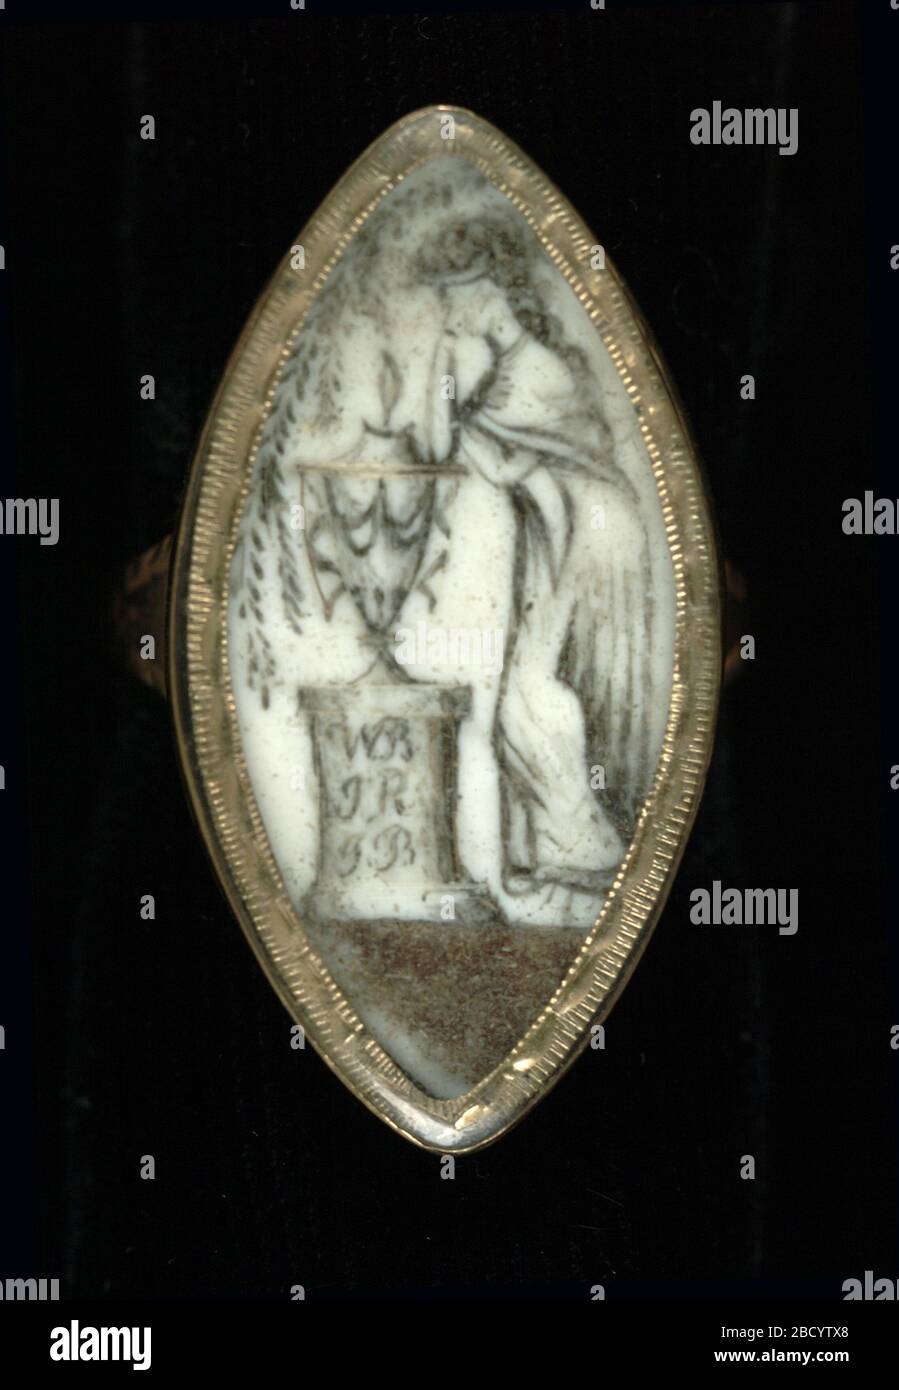 Mourning Ring for William Burnside. Miniature paintings memorializing a friend or family member grew popular in the nineteenth century when the death of Prince Albert sent Queen Victoria into deep mourning. Stock Photo